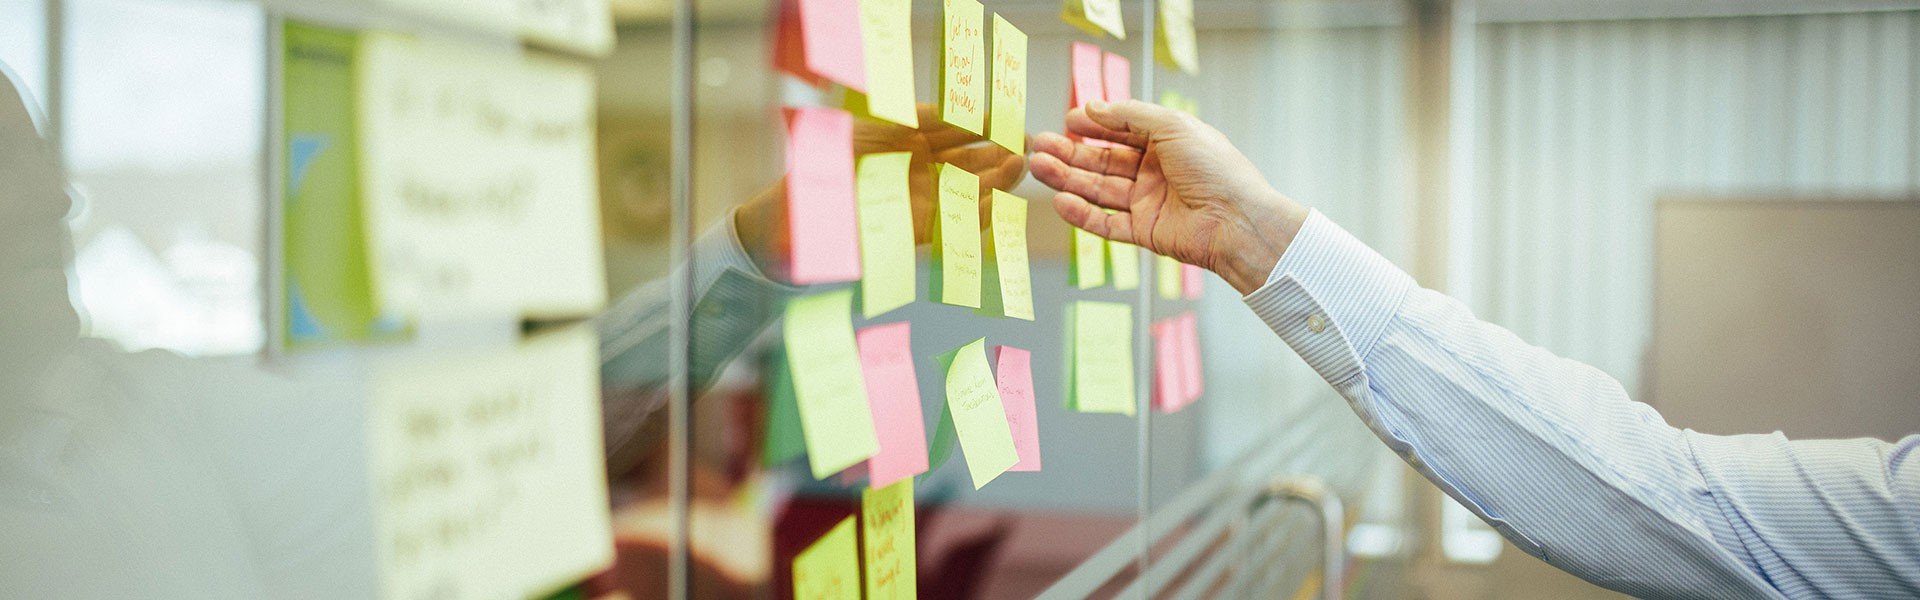 Strategy workshop with postits